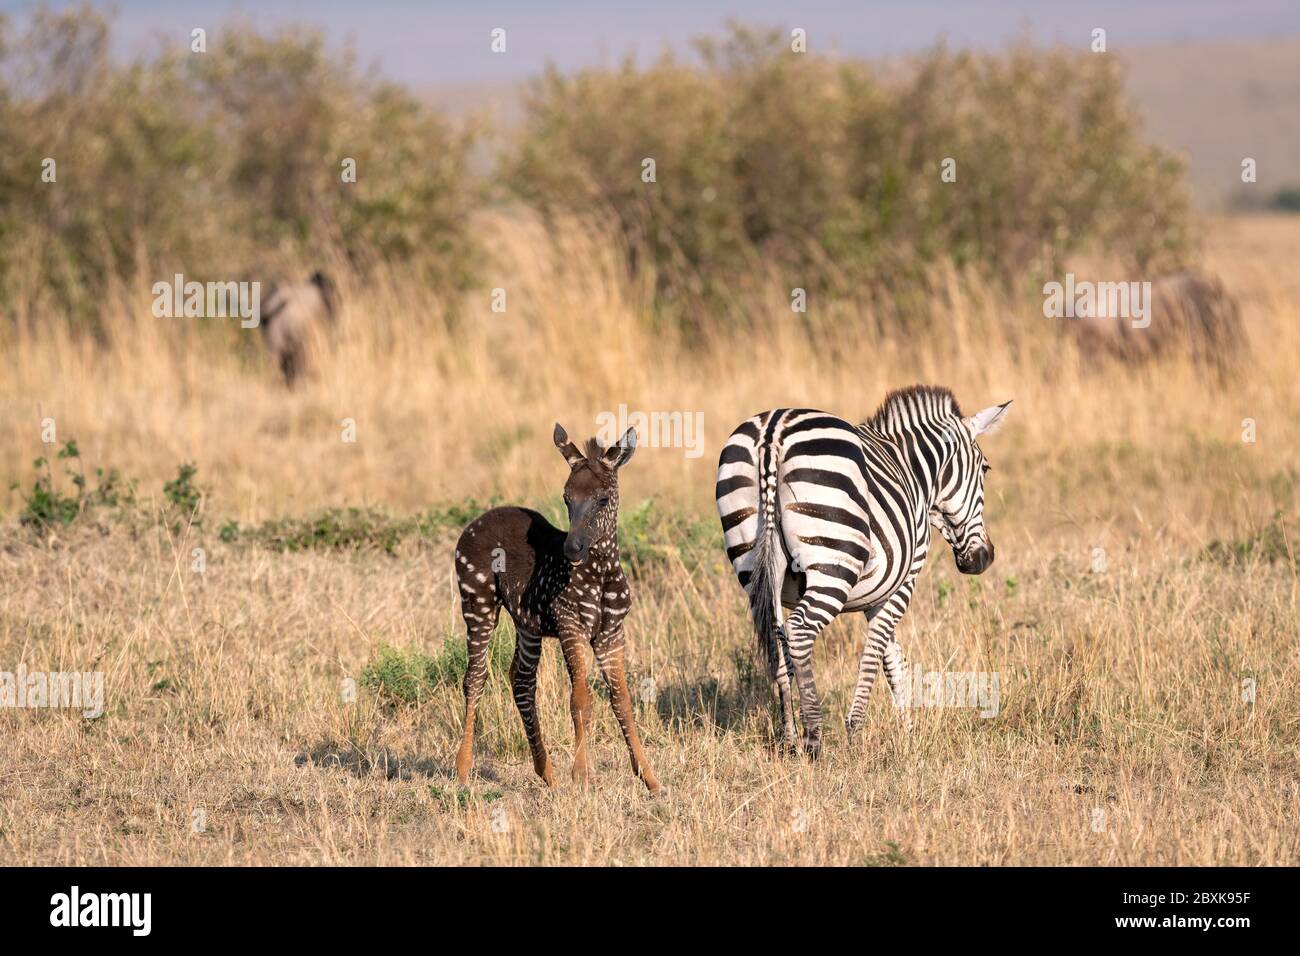 Rare zebra foal with polka dots (spots) instead of stripes, named Tira after the guide who first saw him, with his mother. Stock Photo